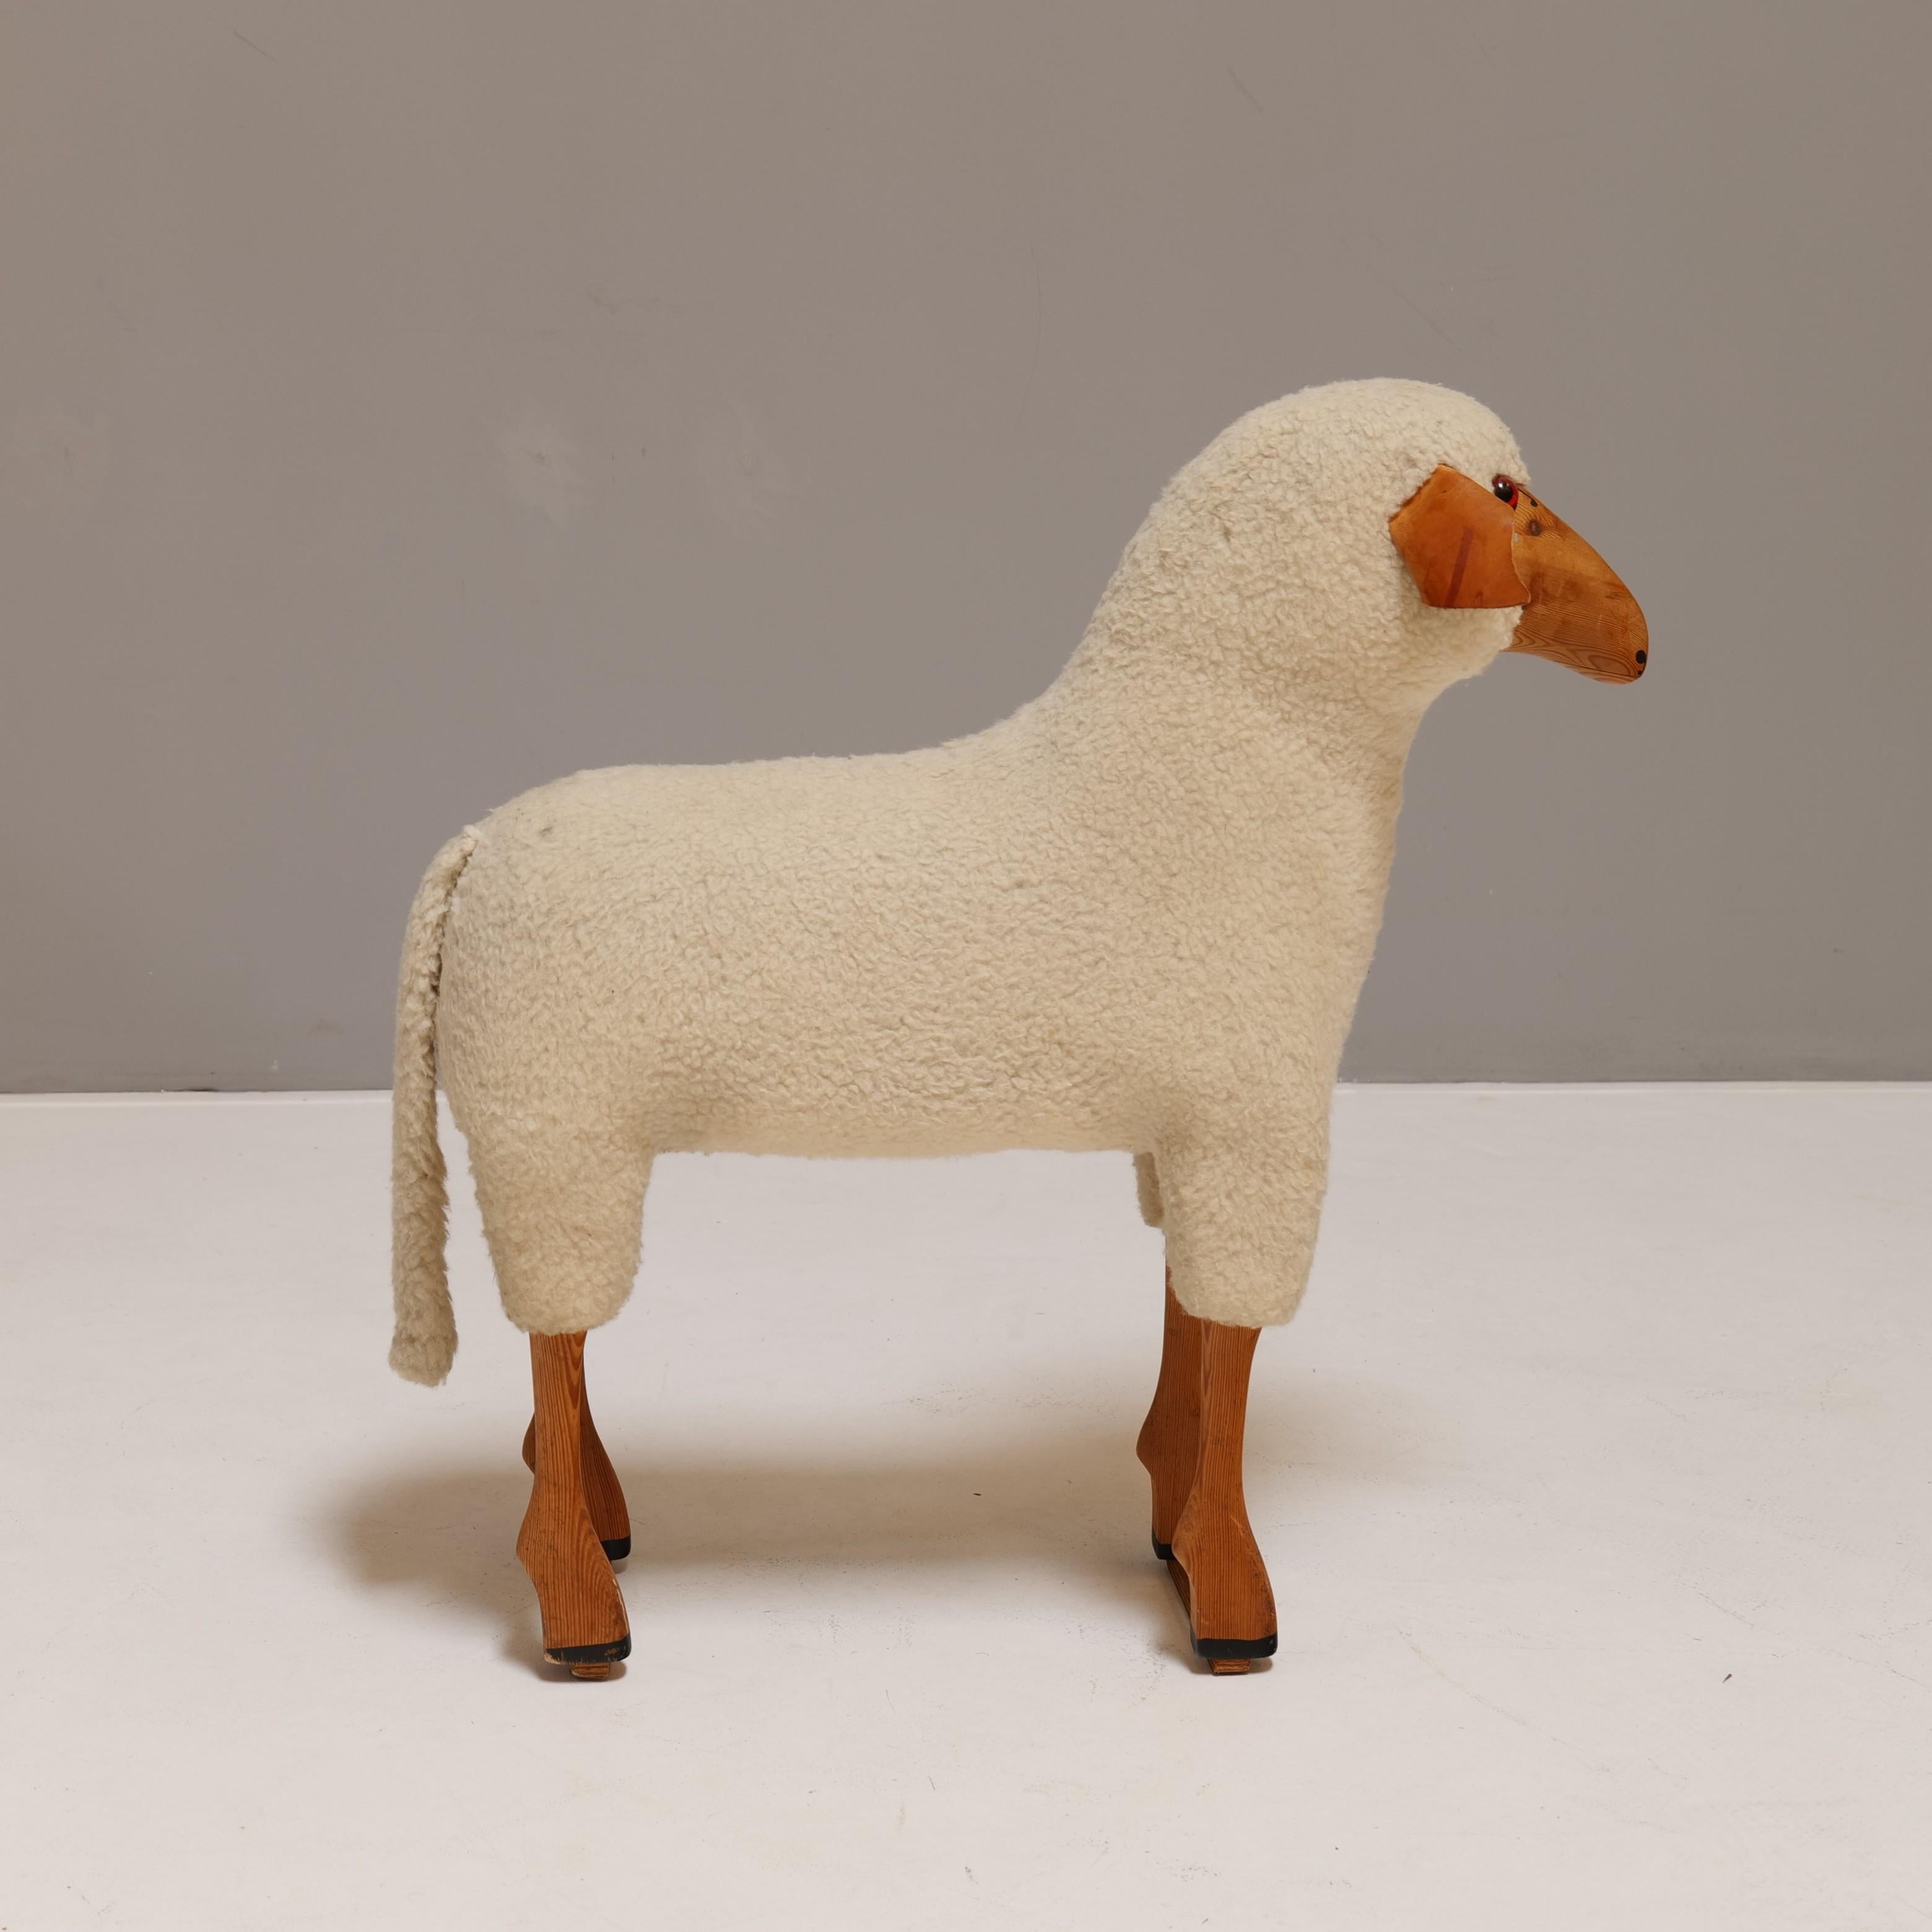 Late 20th Century big vintage sheep by Hanns Peter Krafft schaf for Mayr wool - 1970s Germany